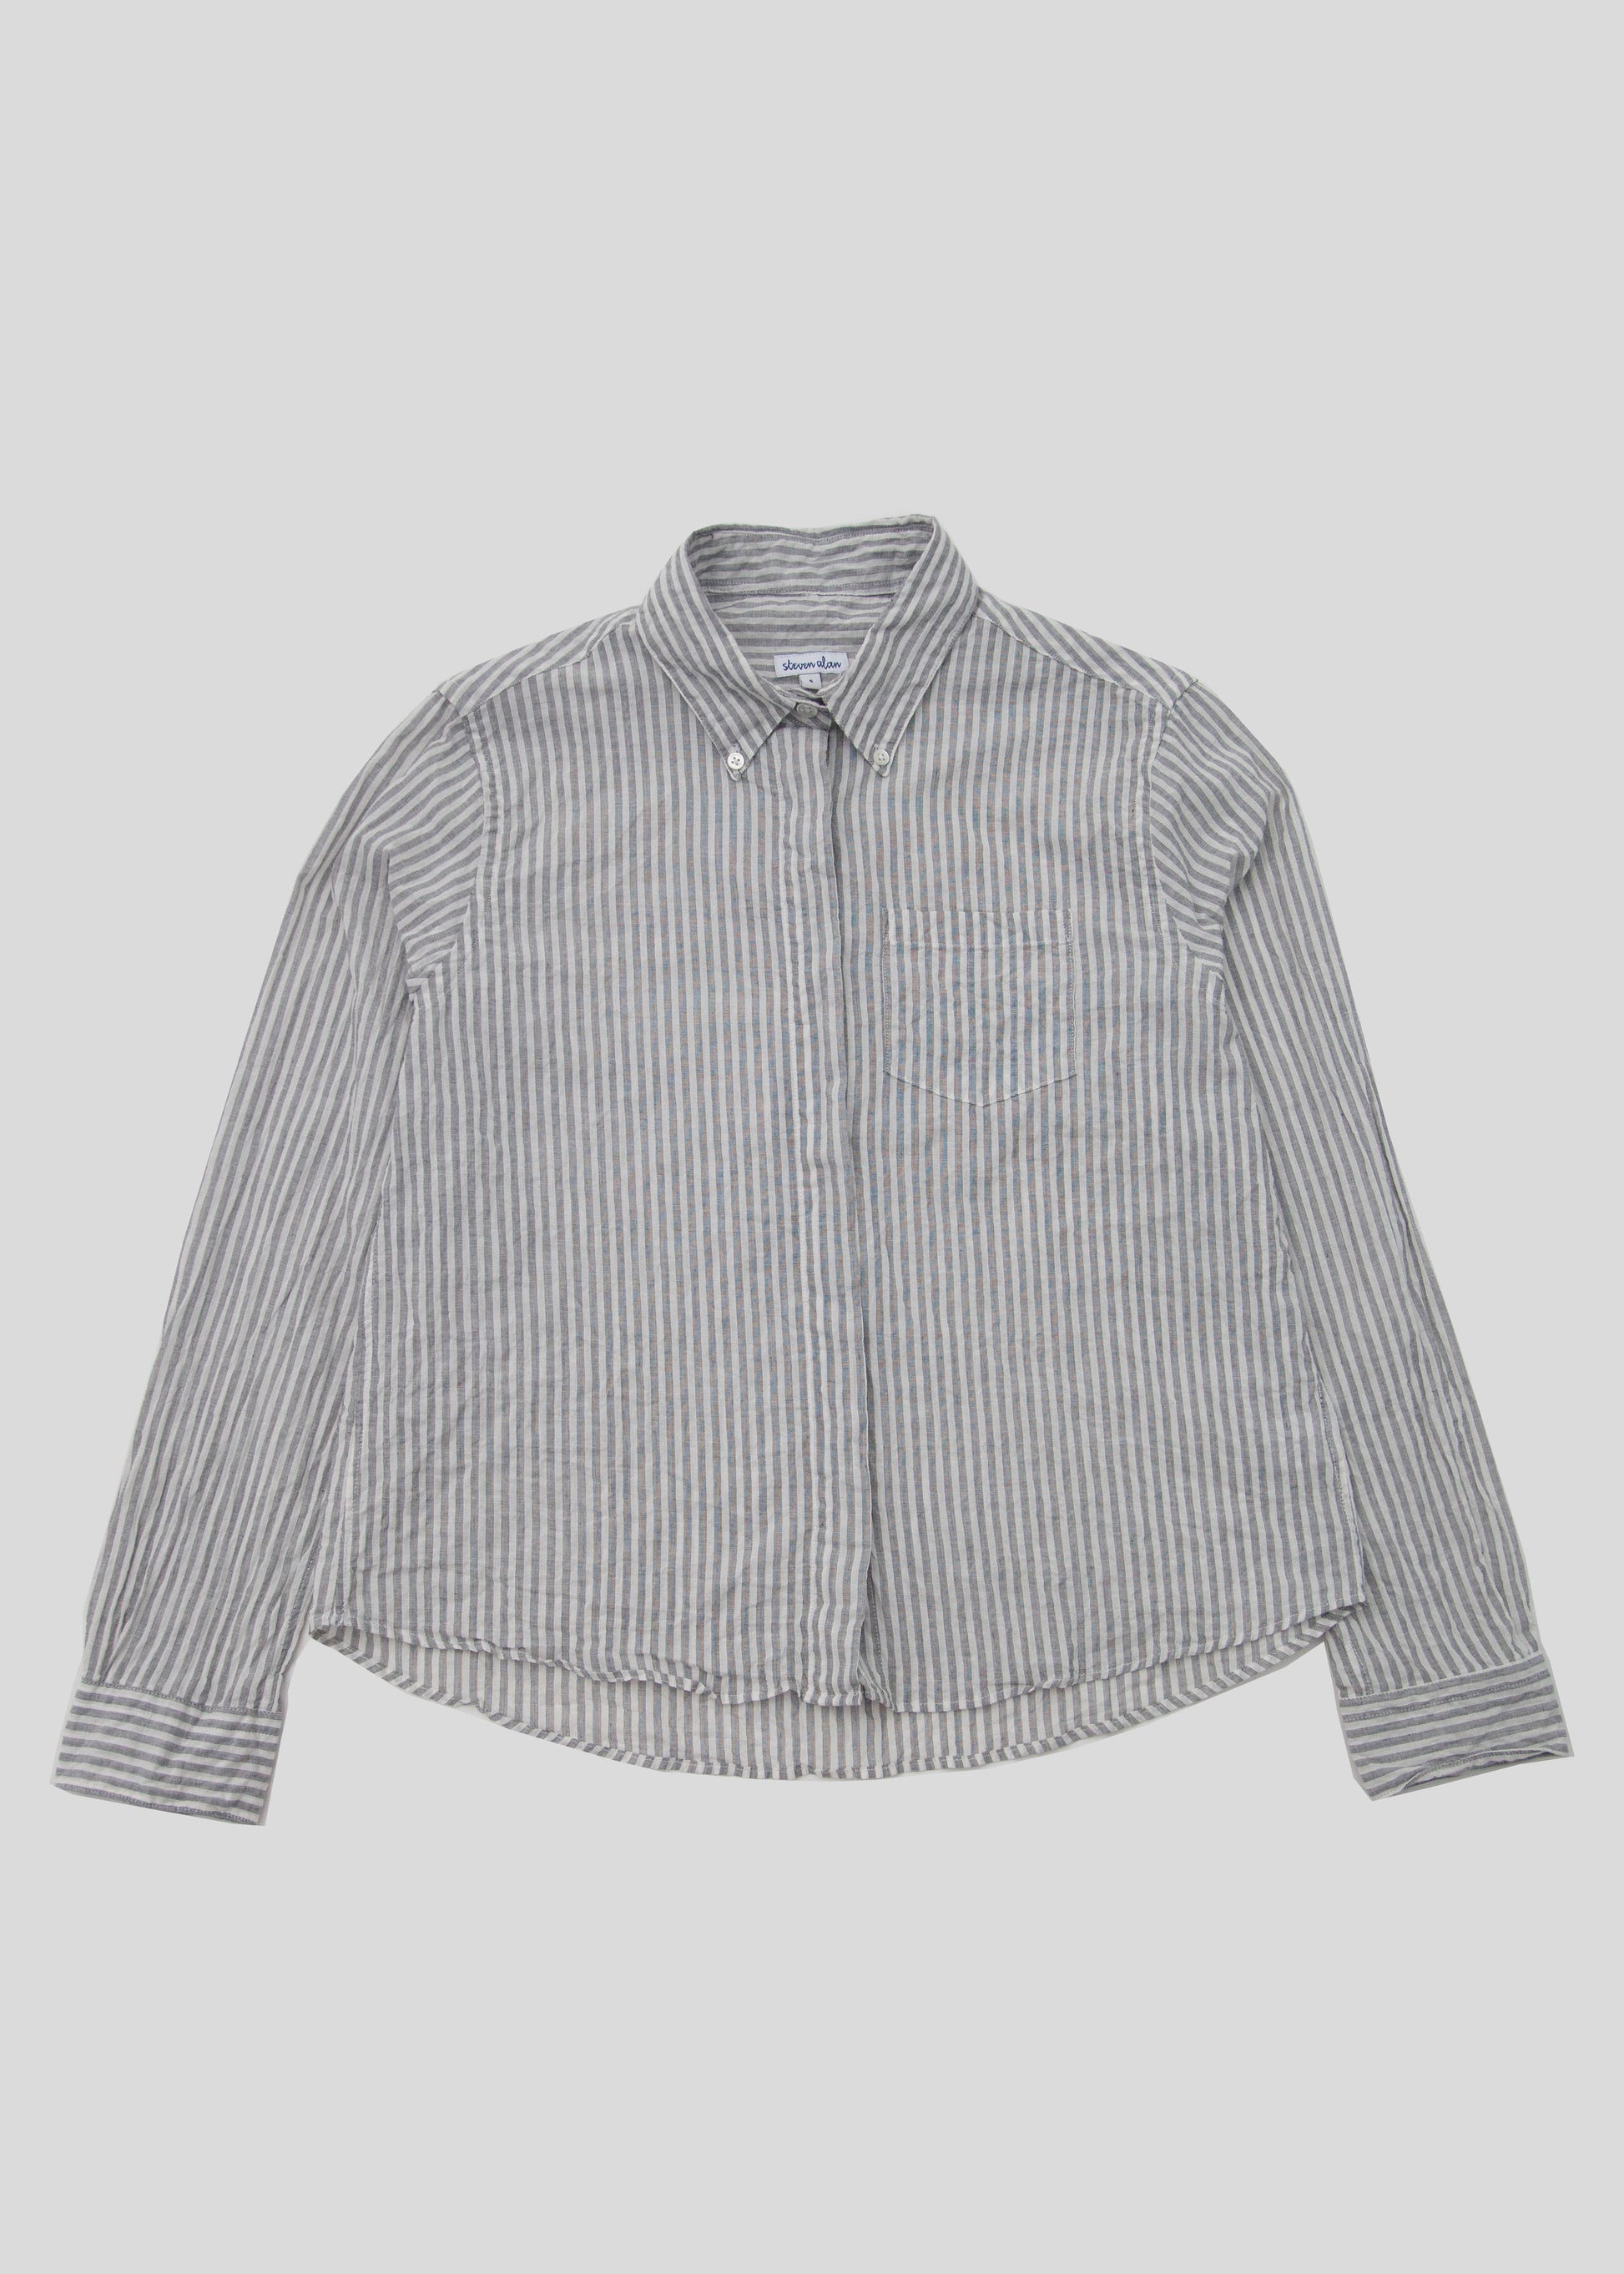 Front flat lay of fly shirt color grey stripe